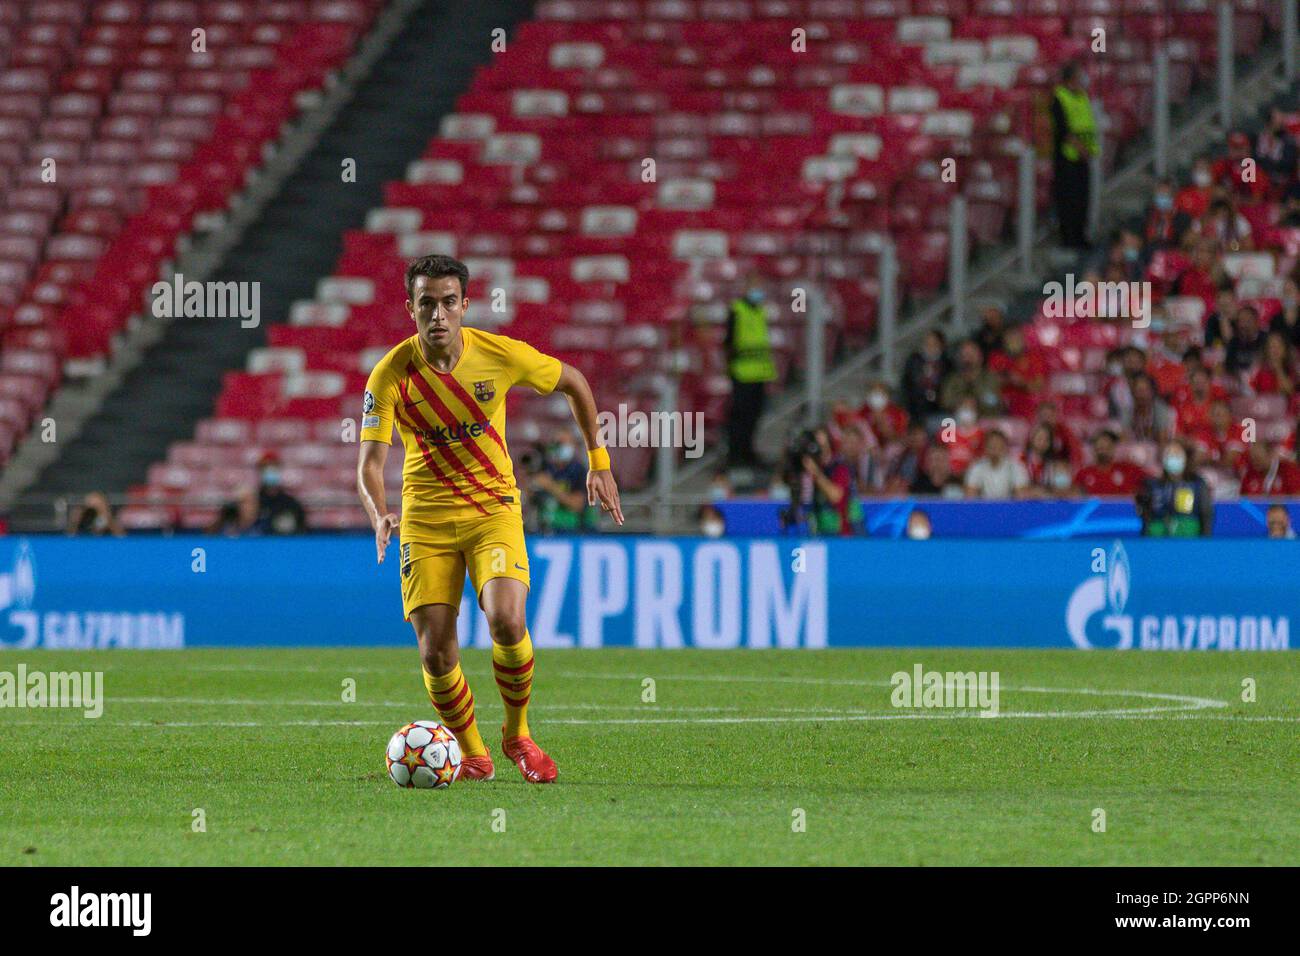 September 29, 2021. Lisbon, Portugal. Barcelona's defender from Spain Eric Garcia (24) in action during the game of the 2nd round of Group E for the UEFA Champions League, Benfica vs Barcelona Credit: Alexandre de Sousa/Alamy Live News Stock Photo